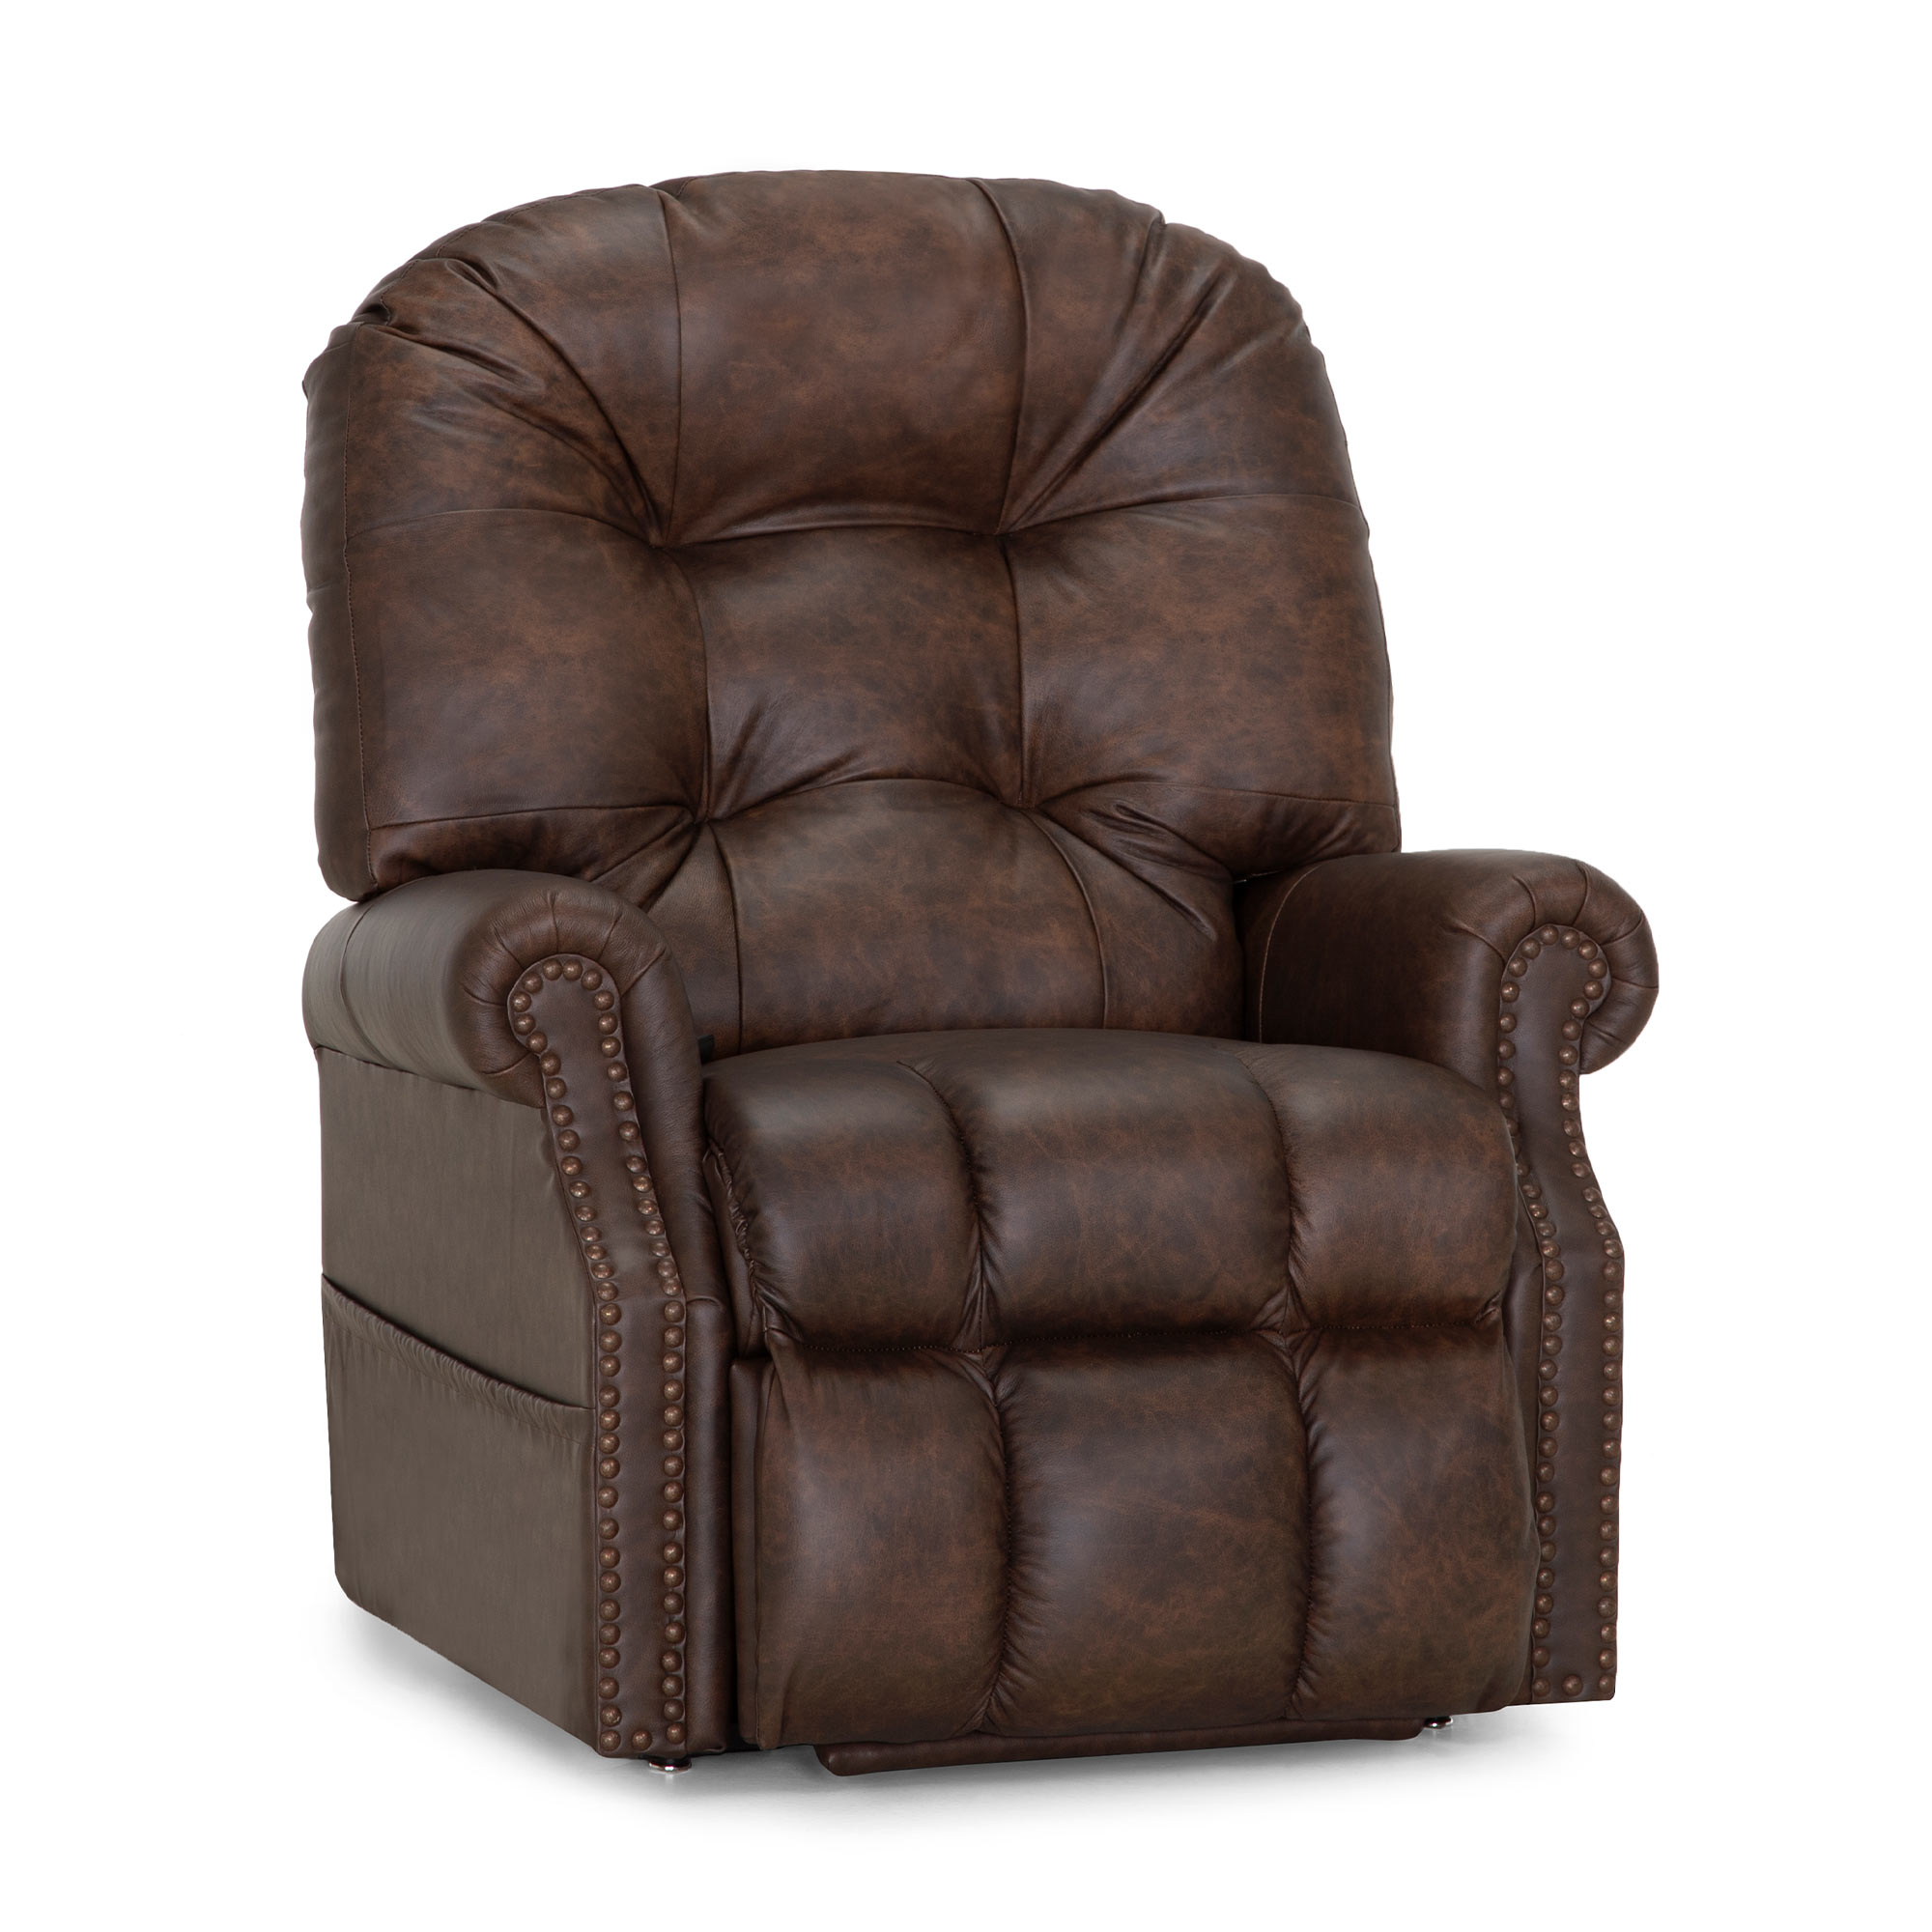 660 Austin Leather Lift Chair, Leather Lift Recliner